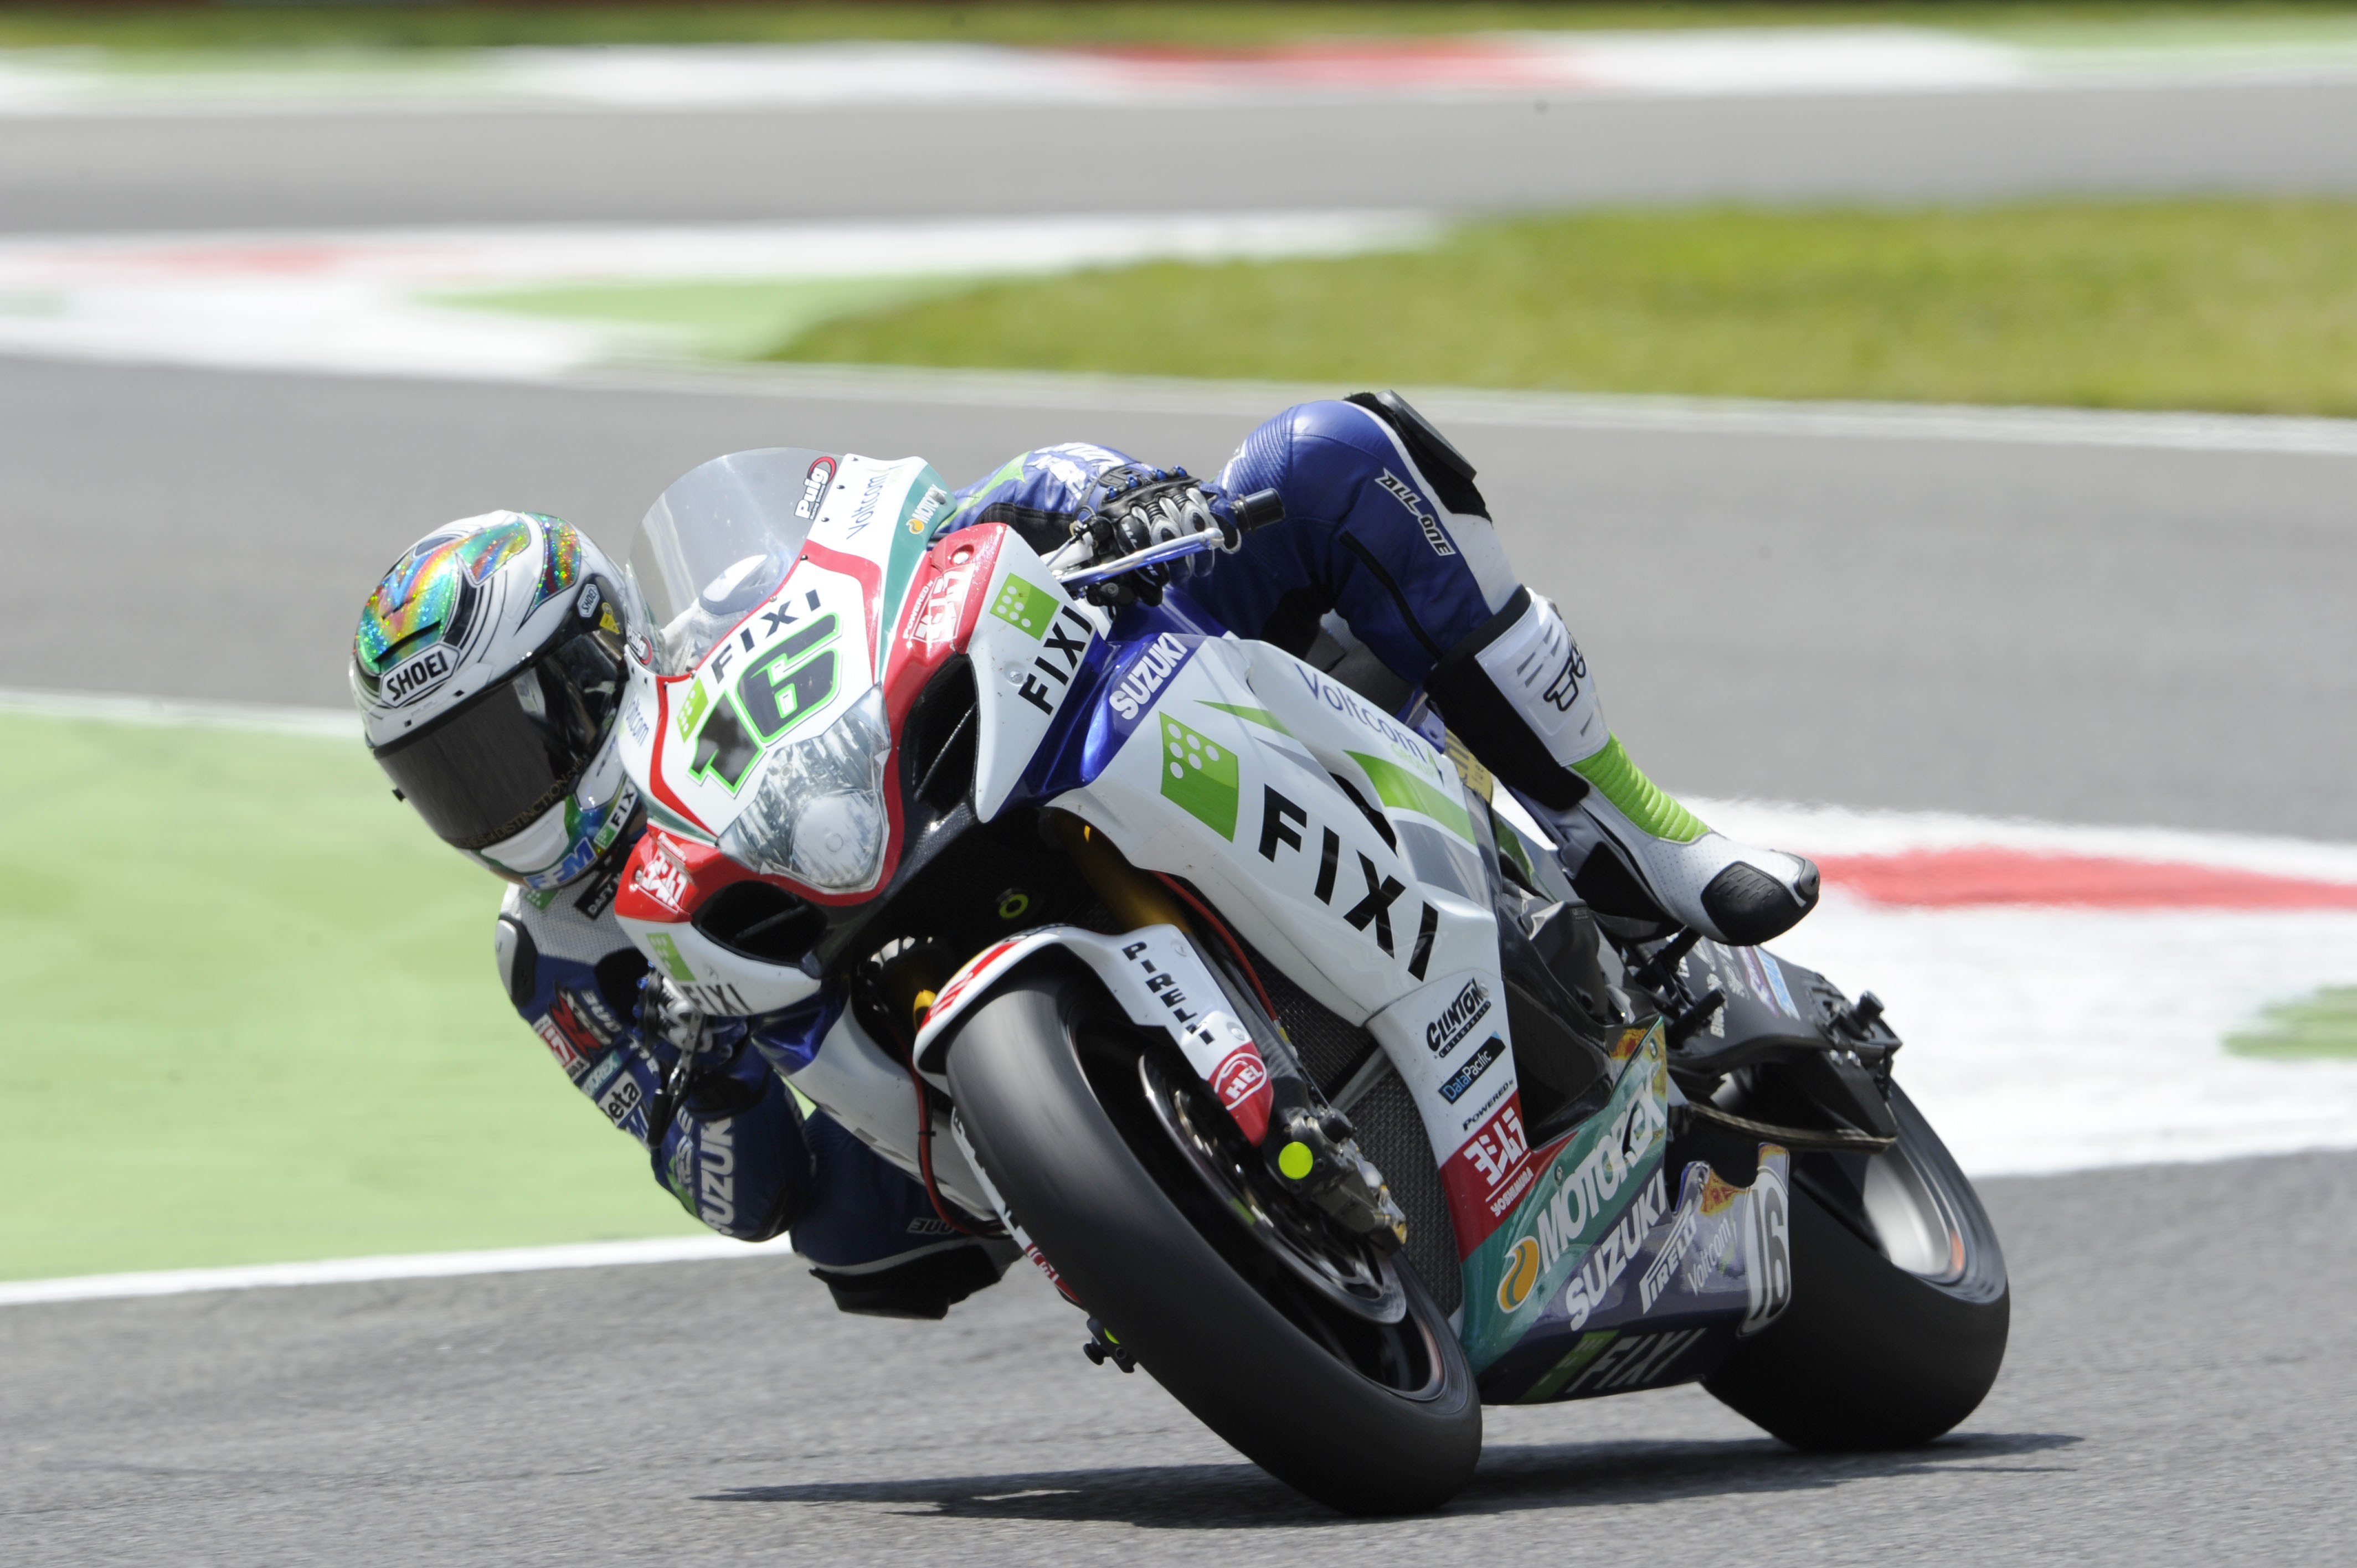 WSB 2013: Monza race results